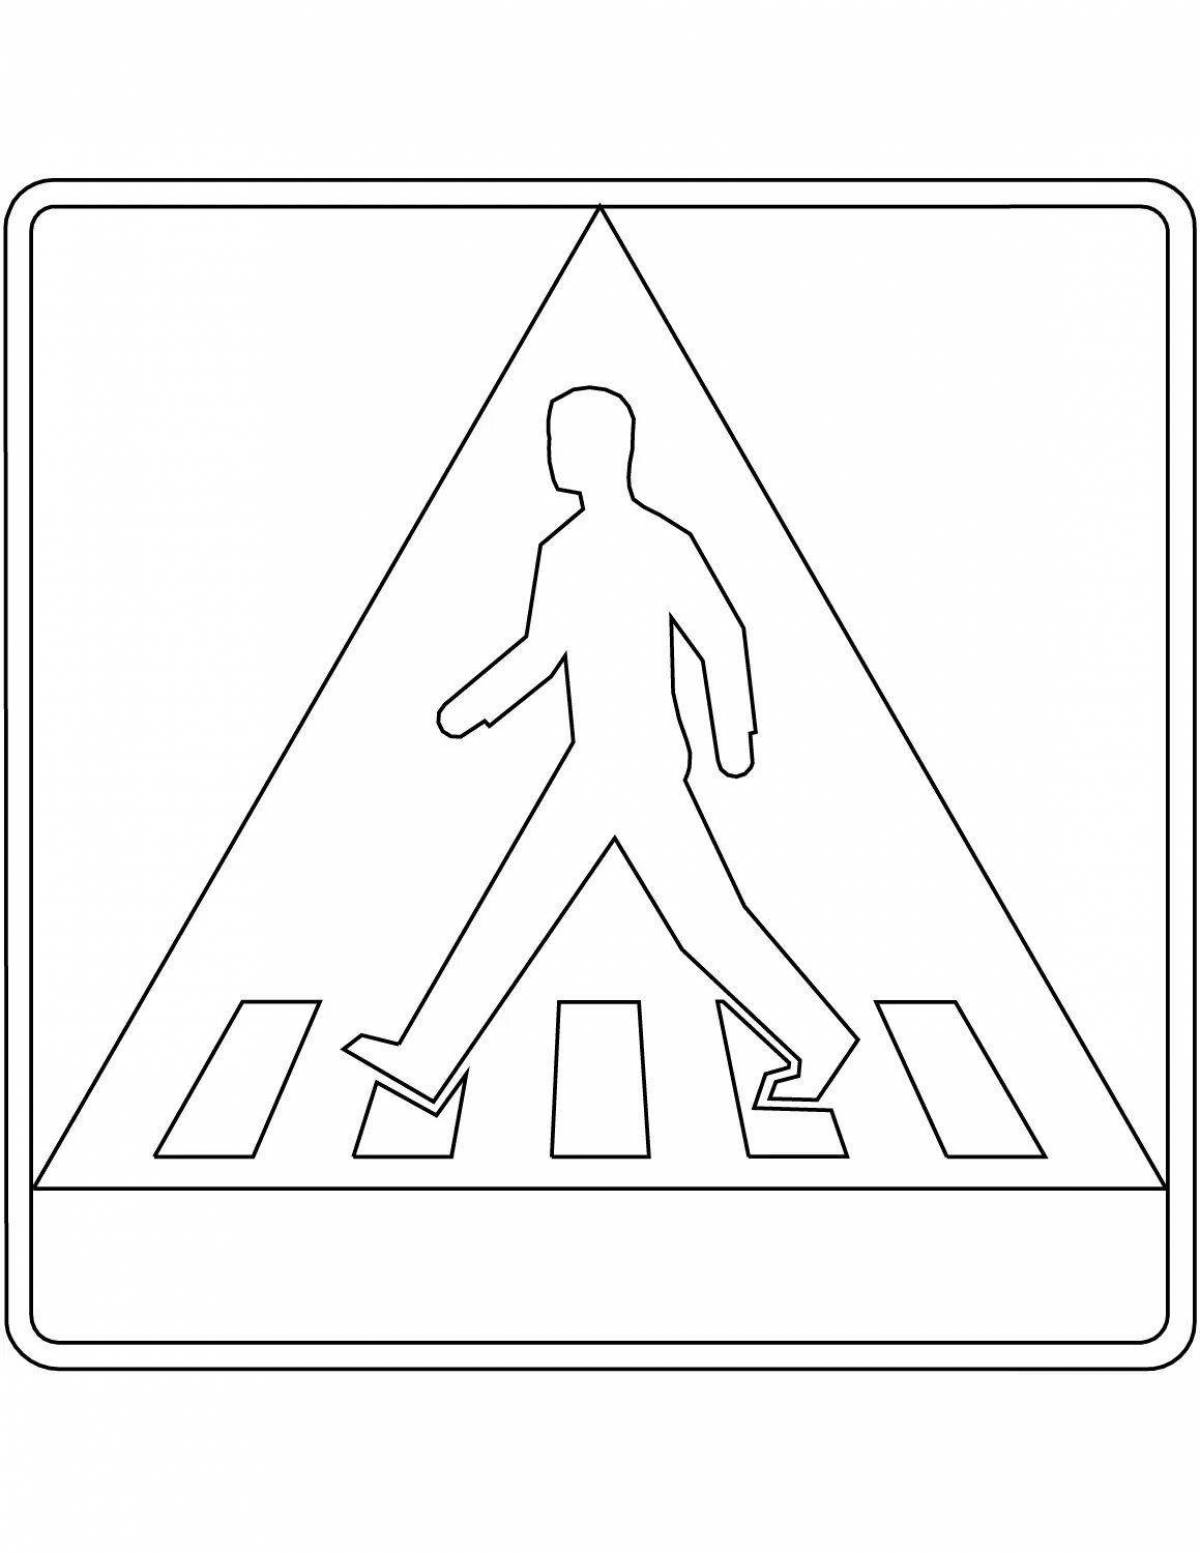 Animated walking path coloring page